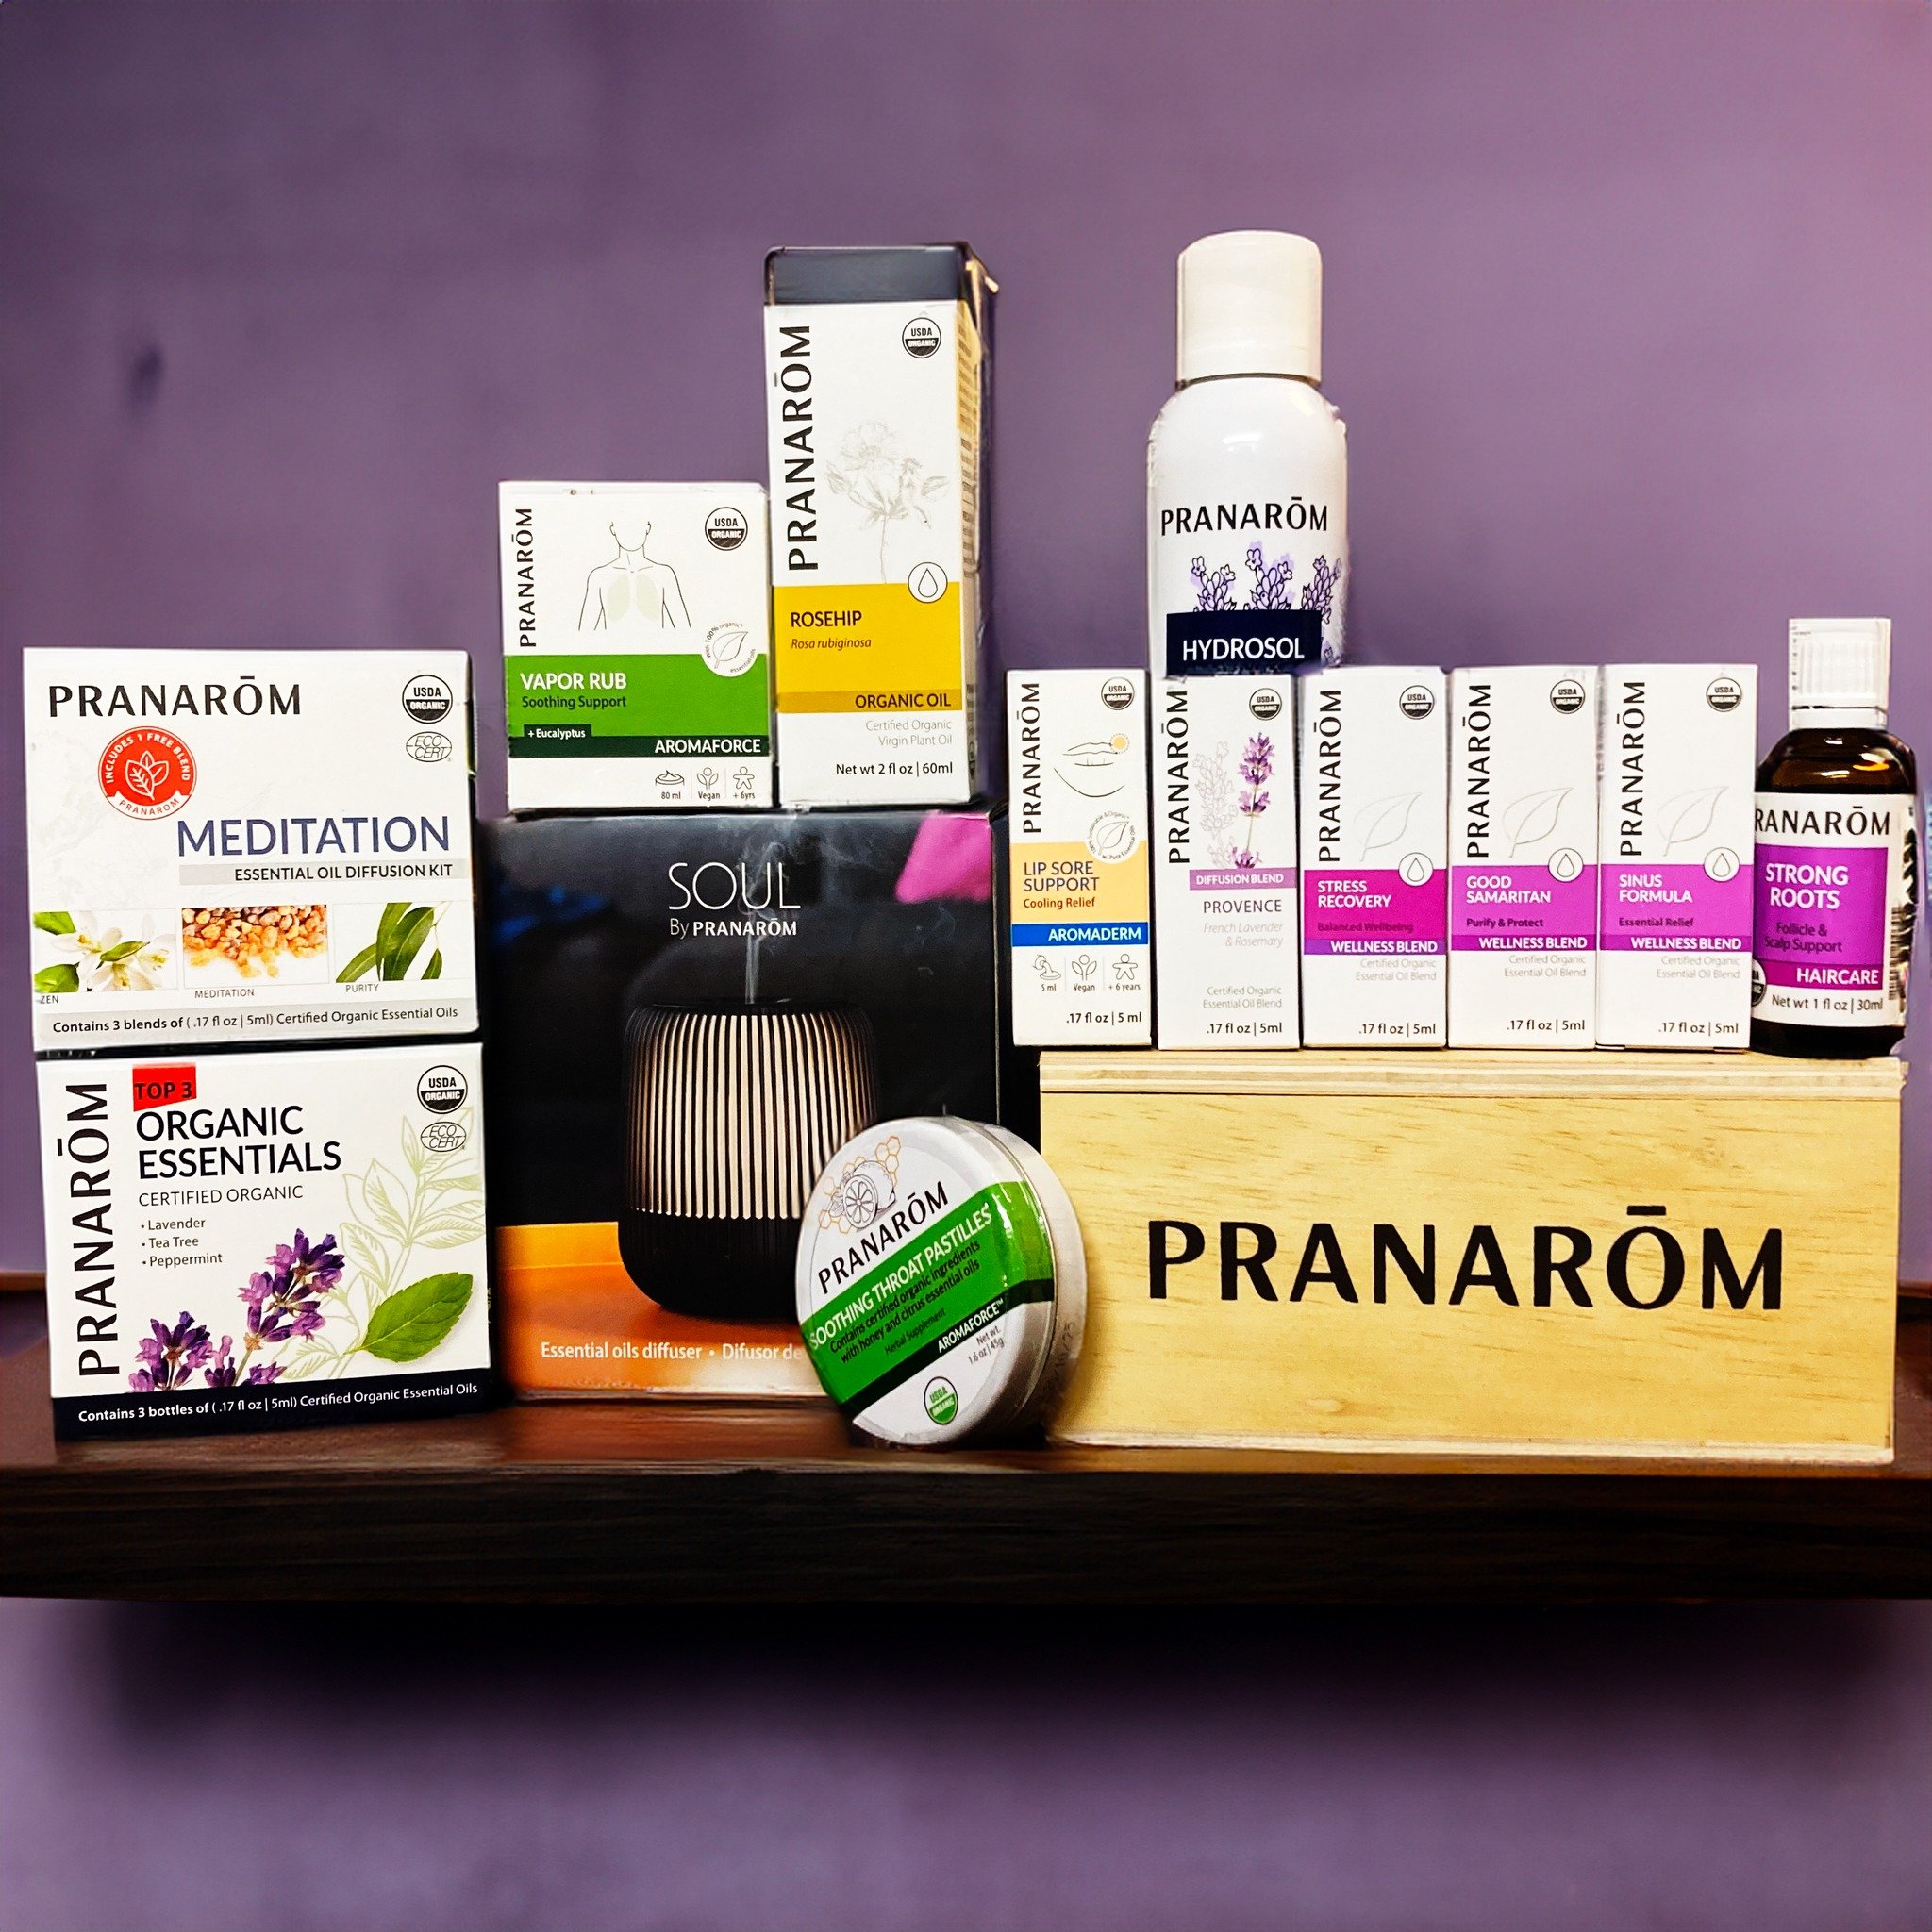 GIVEAWAY TIME! We're partnering with @pranarom_usa to give away an amazing mothers day essential oil gift set!

Just like this post and make sure to be following both the Rainbow Blossom and the Pranarom accounts and this essential oil mothers day gi